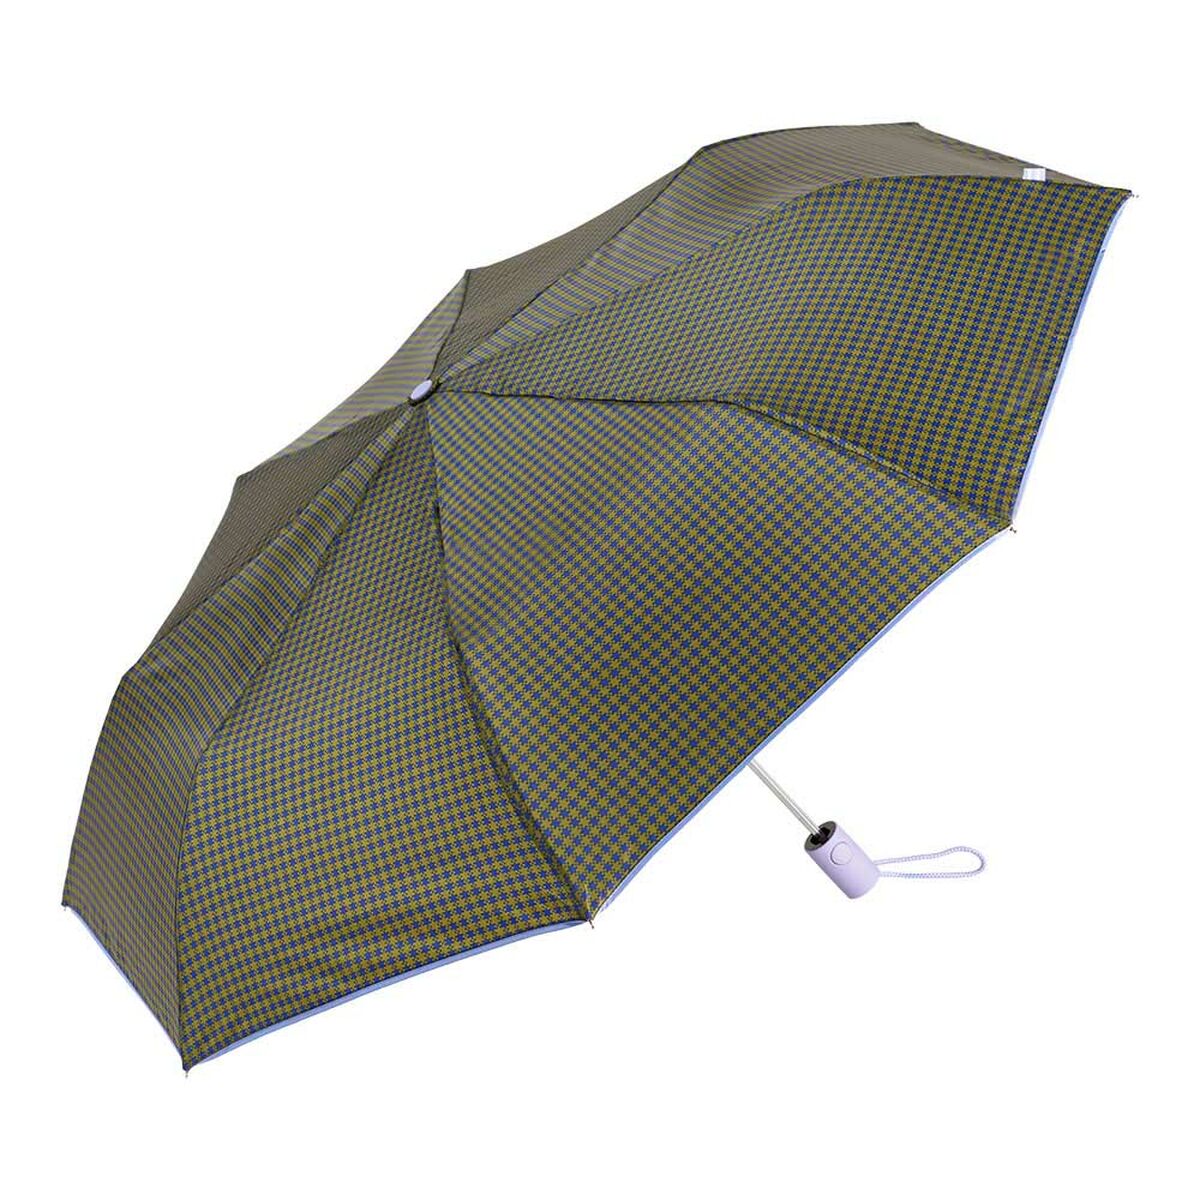 Foldable Umbrella C-Collection C505 Ø 92 cm Automatic With protection from sunlight UV50+